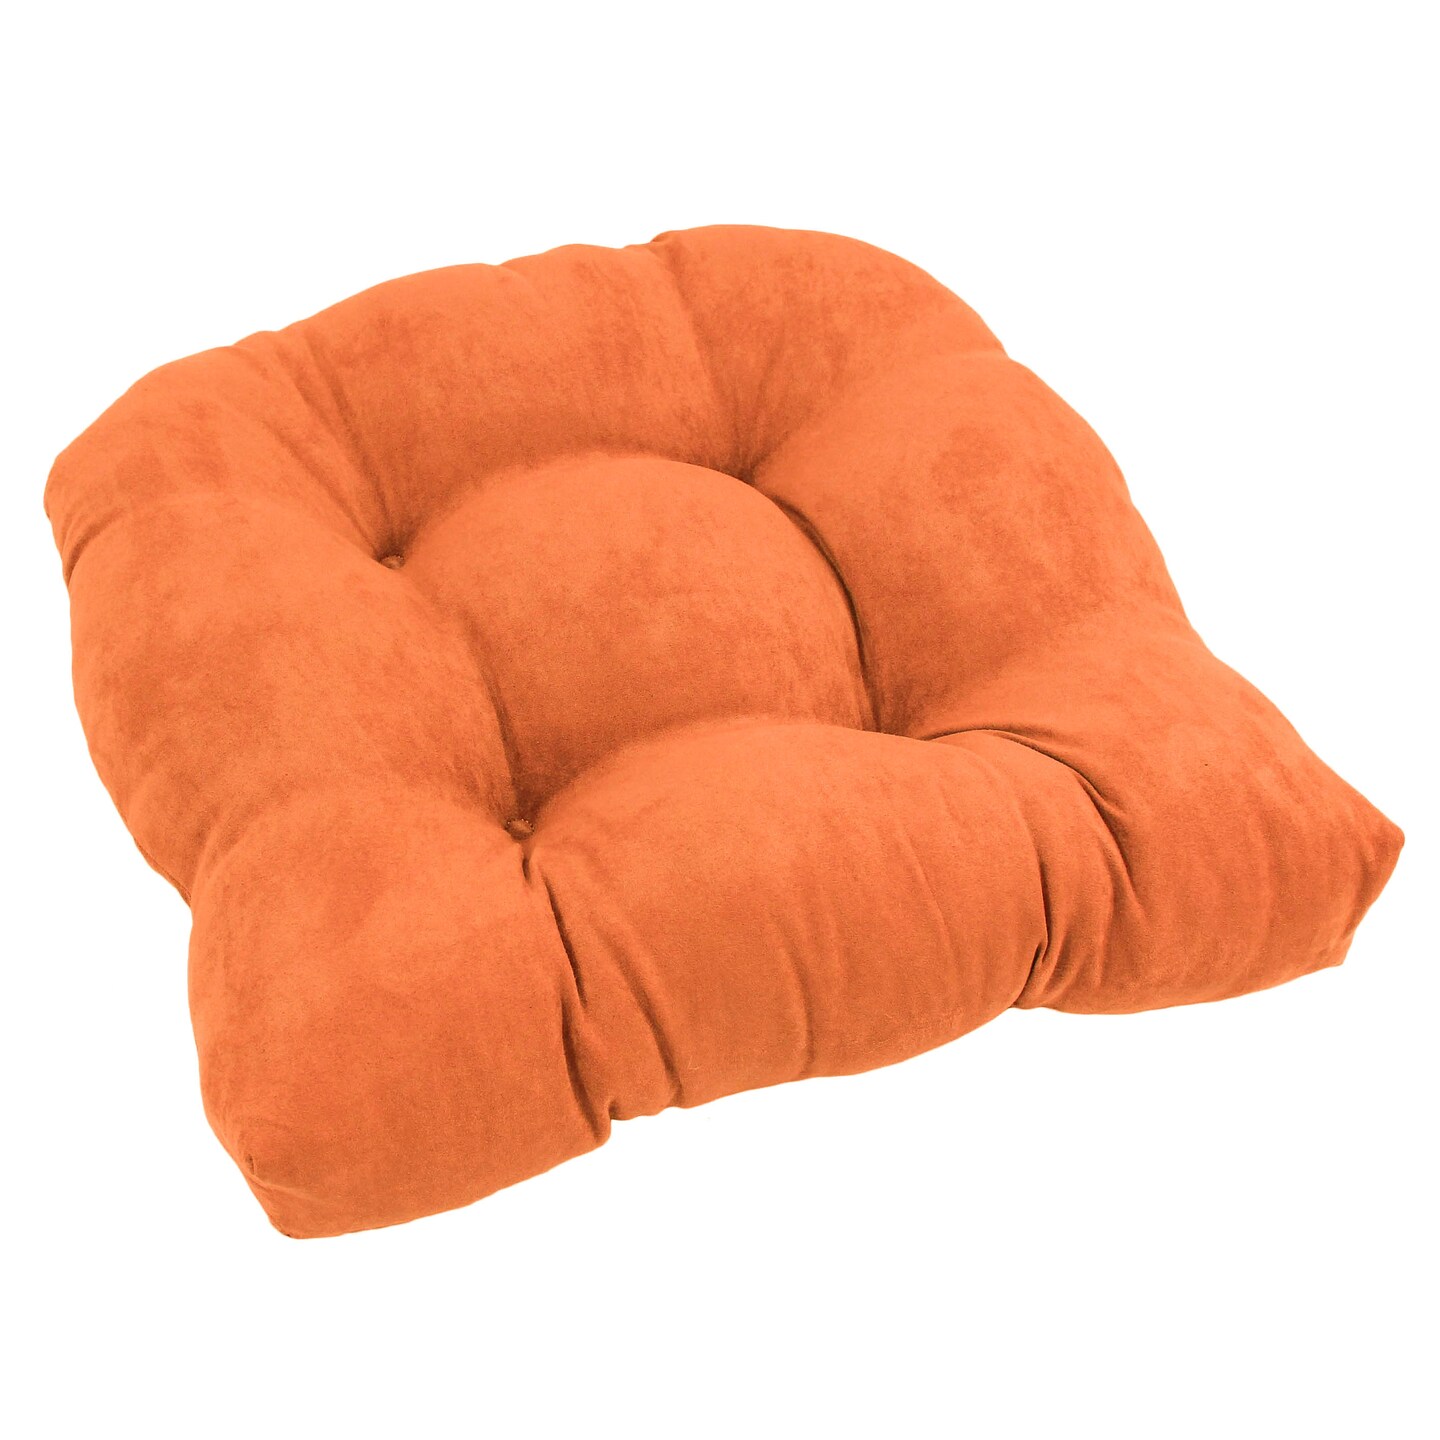 19-inch U-Shaped Micro Suede Tufted Dining Chair Cushion - Tangerine Dream